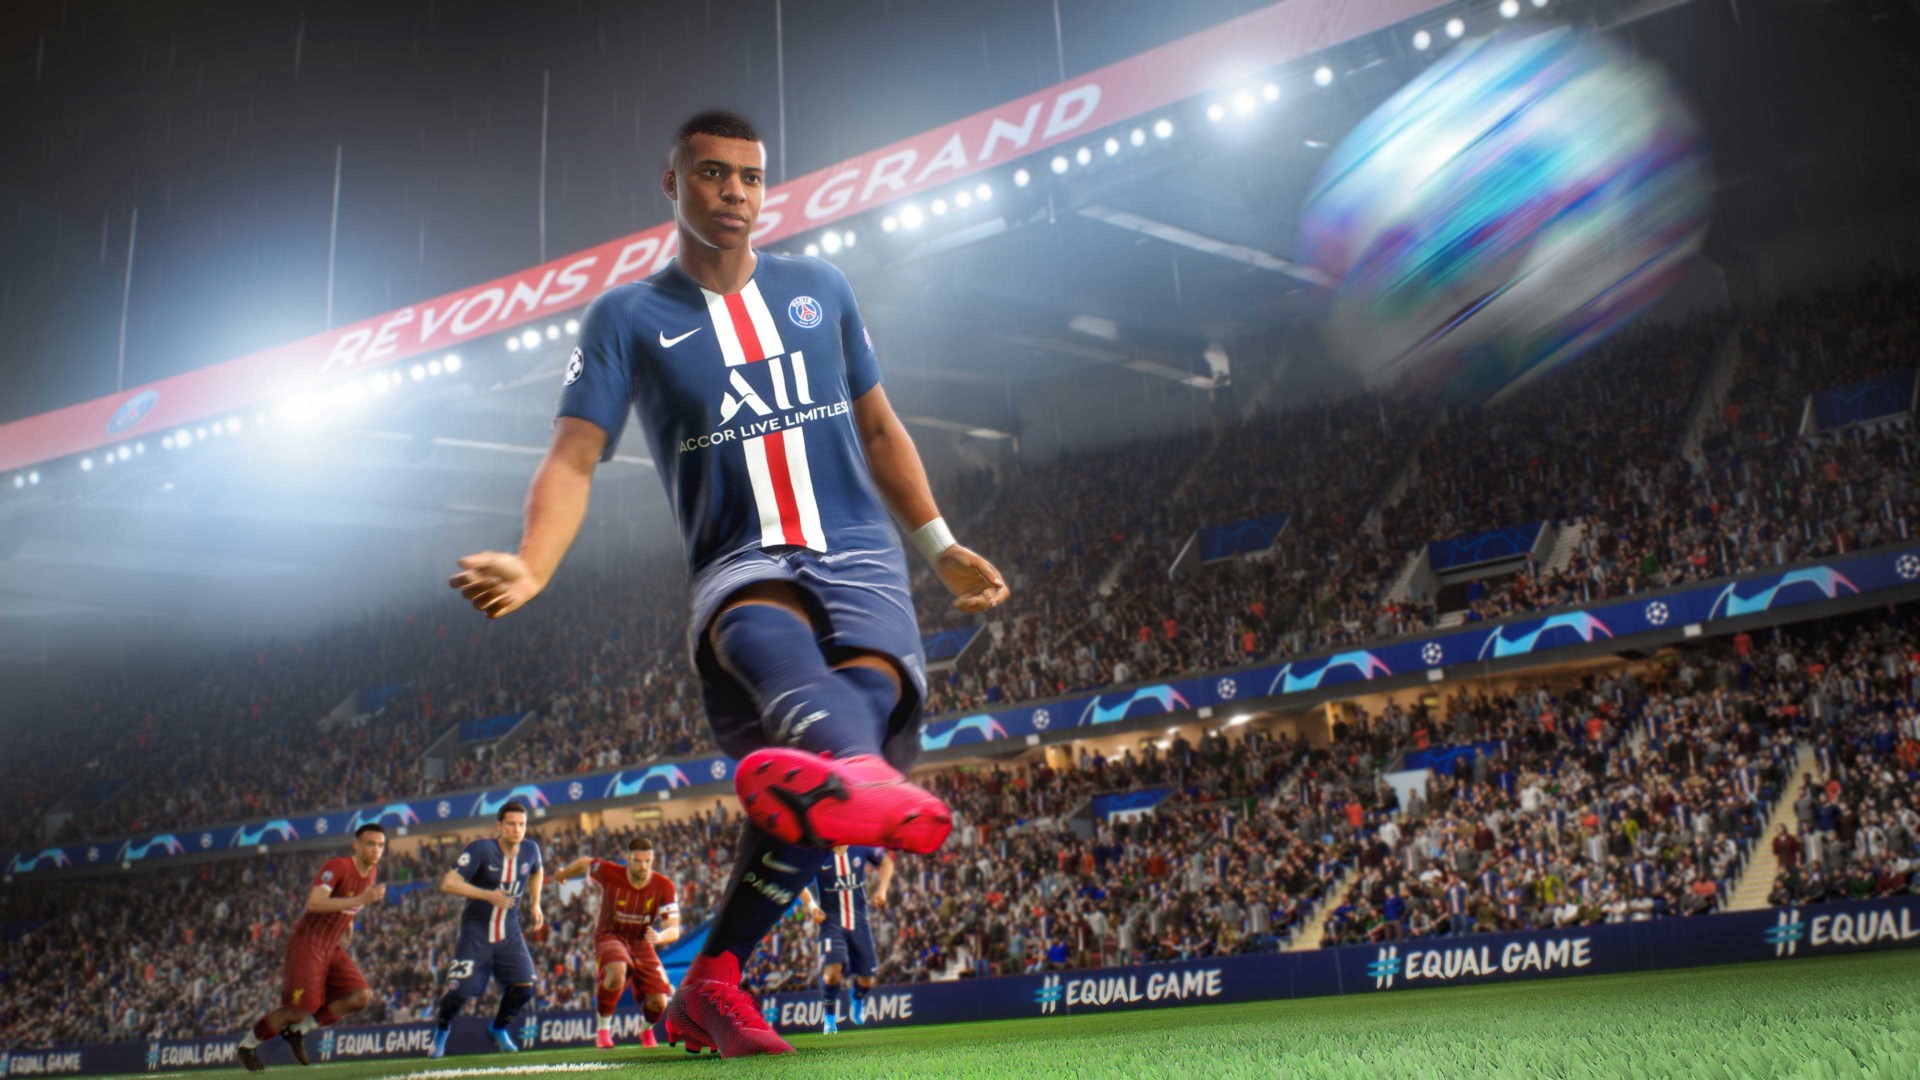 FIFA 21: Which big clubs are missing and why aren't they in the game?